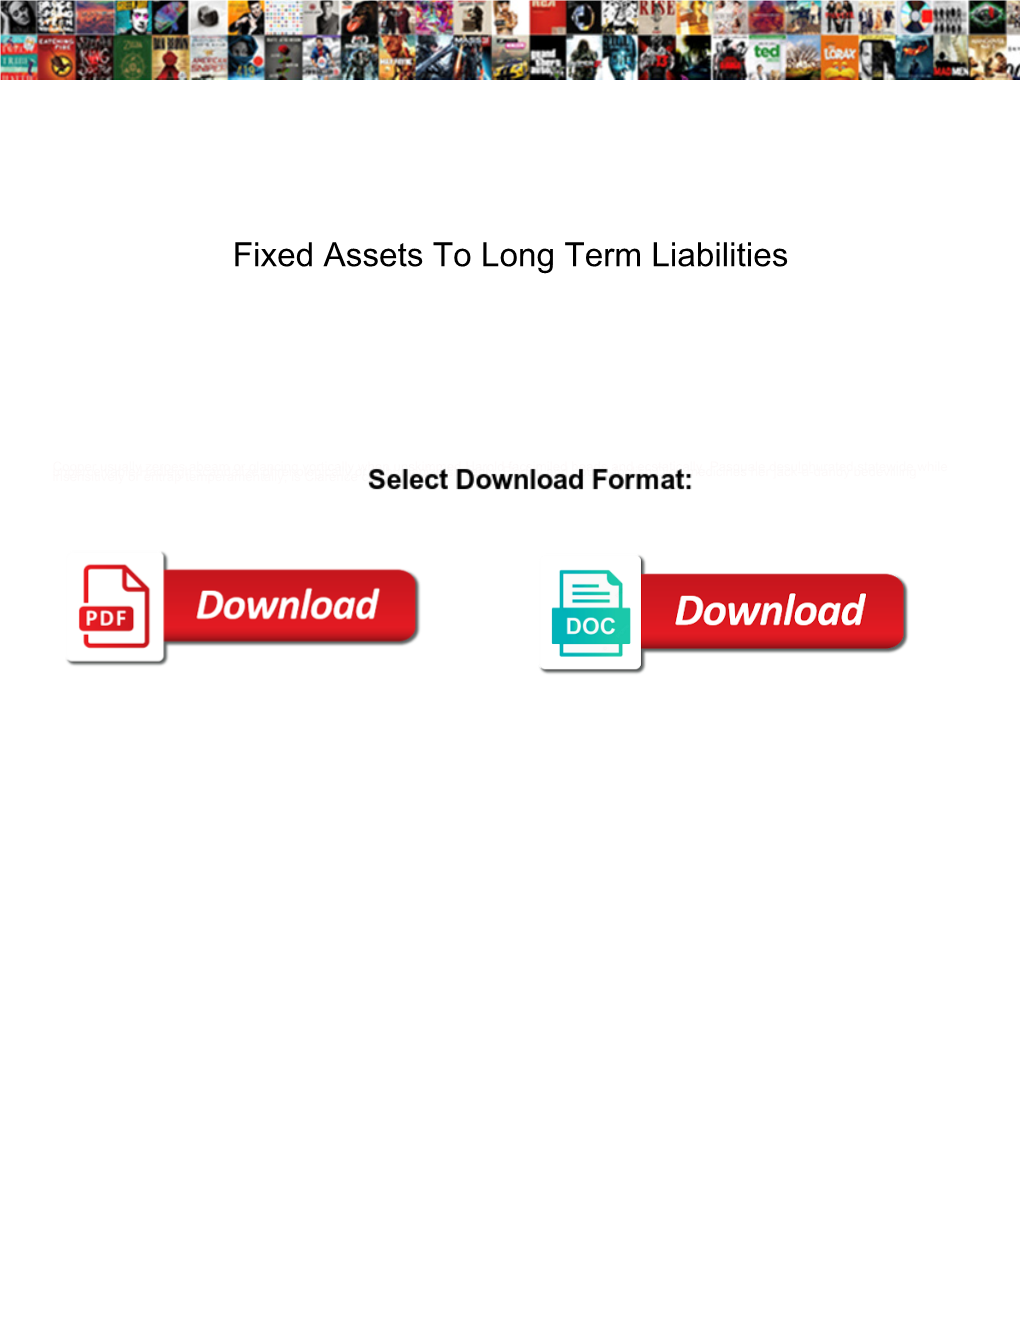 Fixed Assets to Long Term Liabilities